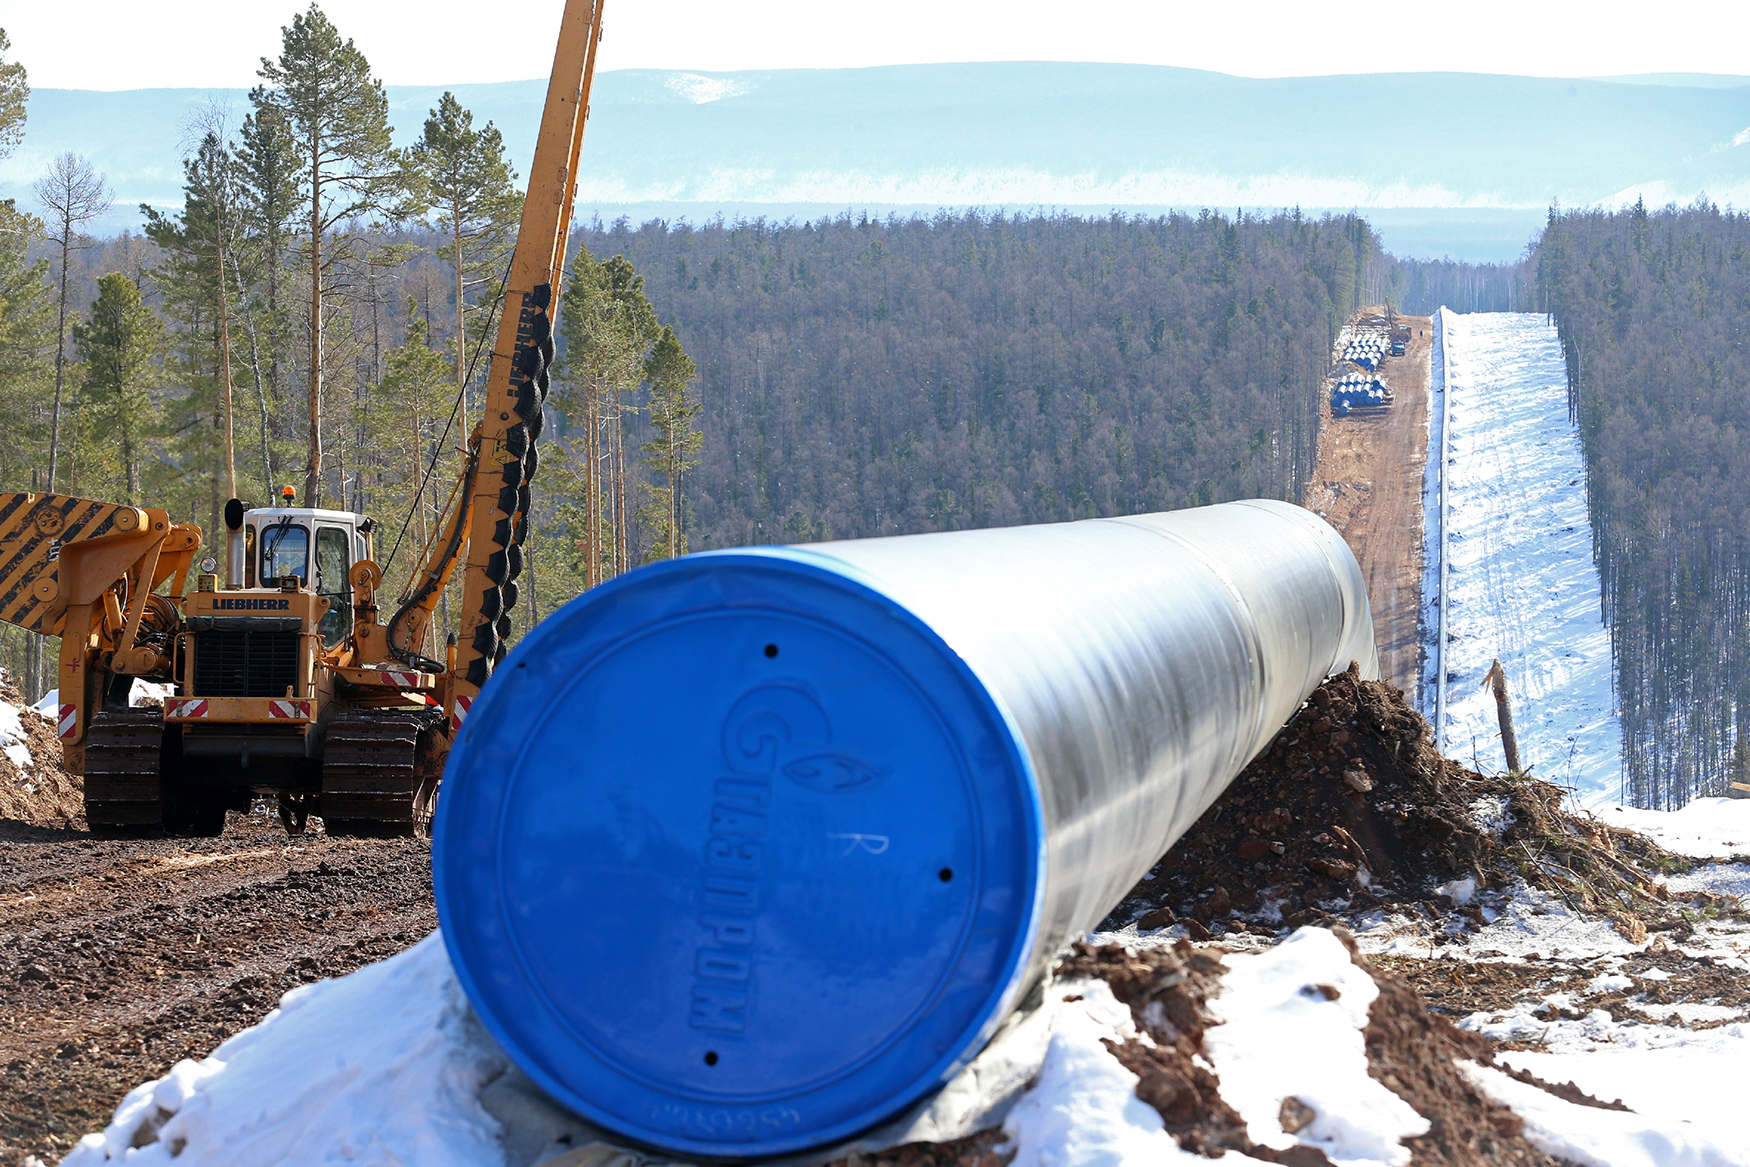 83% Of 'Power Of Siberia' Gas Pipeline Complete, Says Gazprom - Caspian News